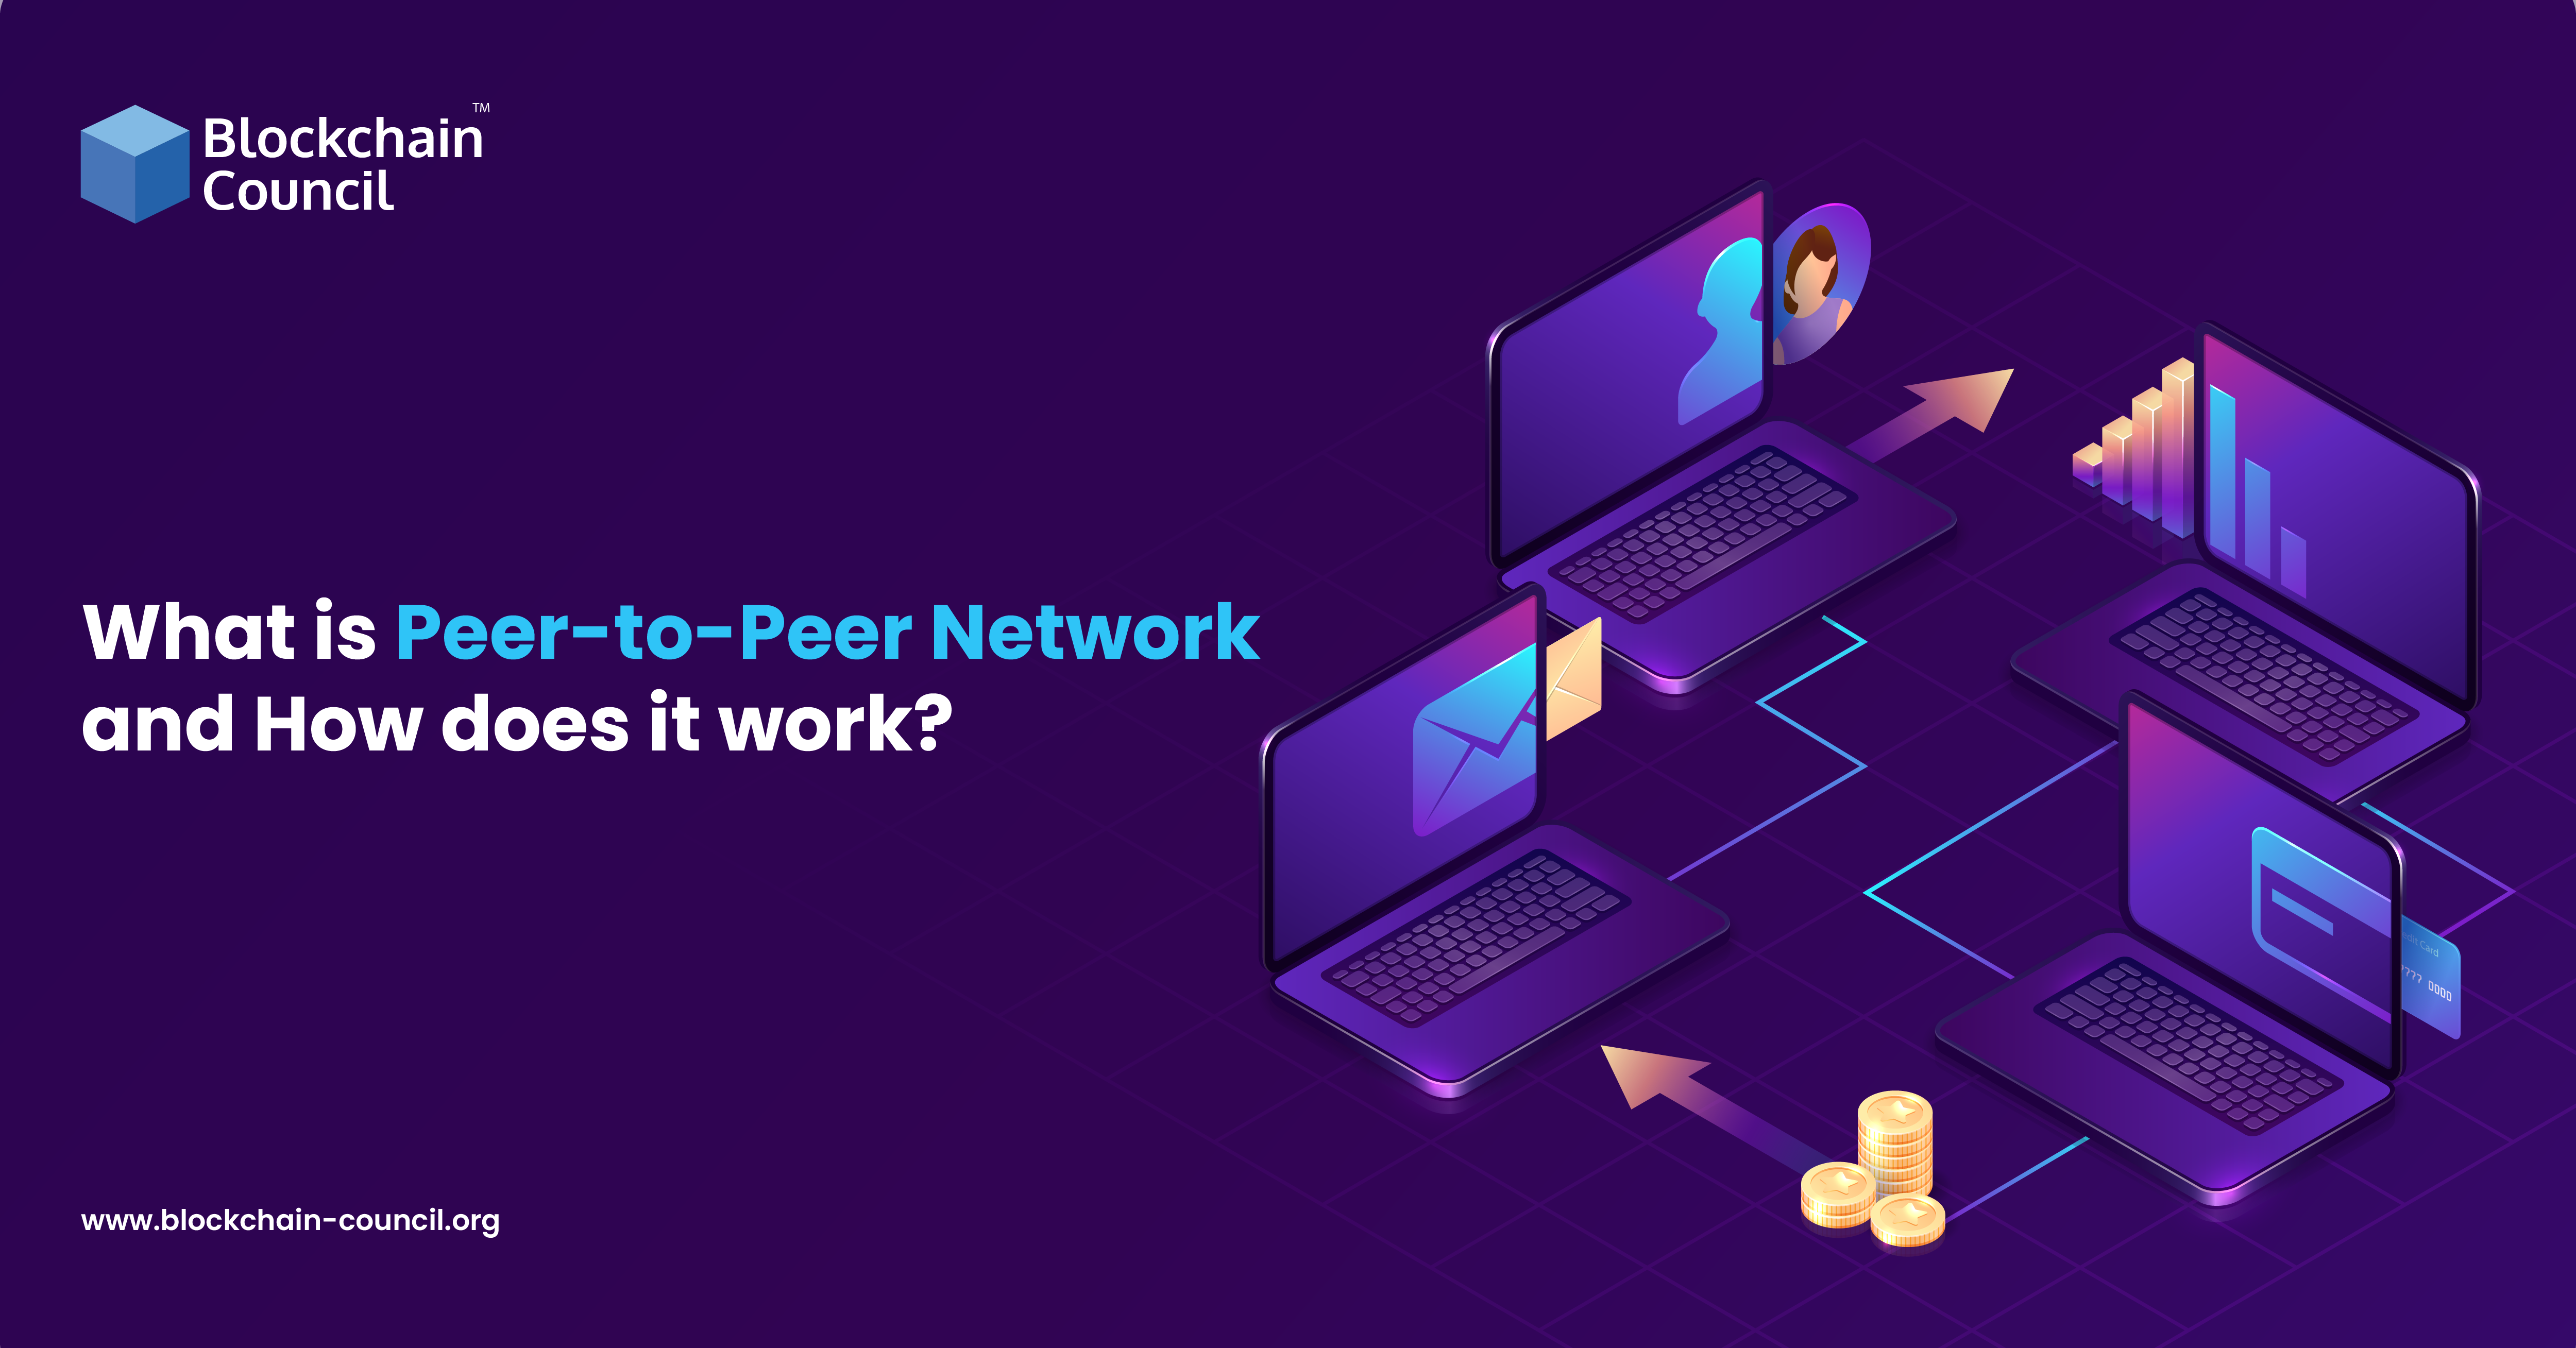 What is Peer-to-Peer Network and How does it work